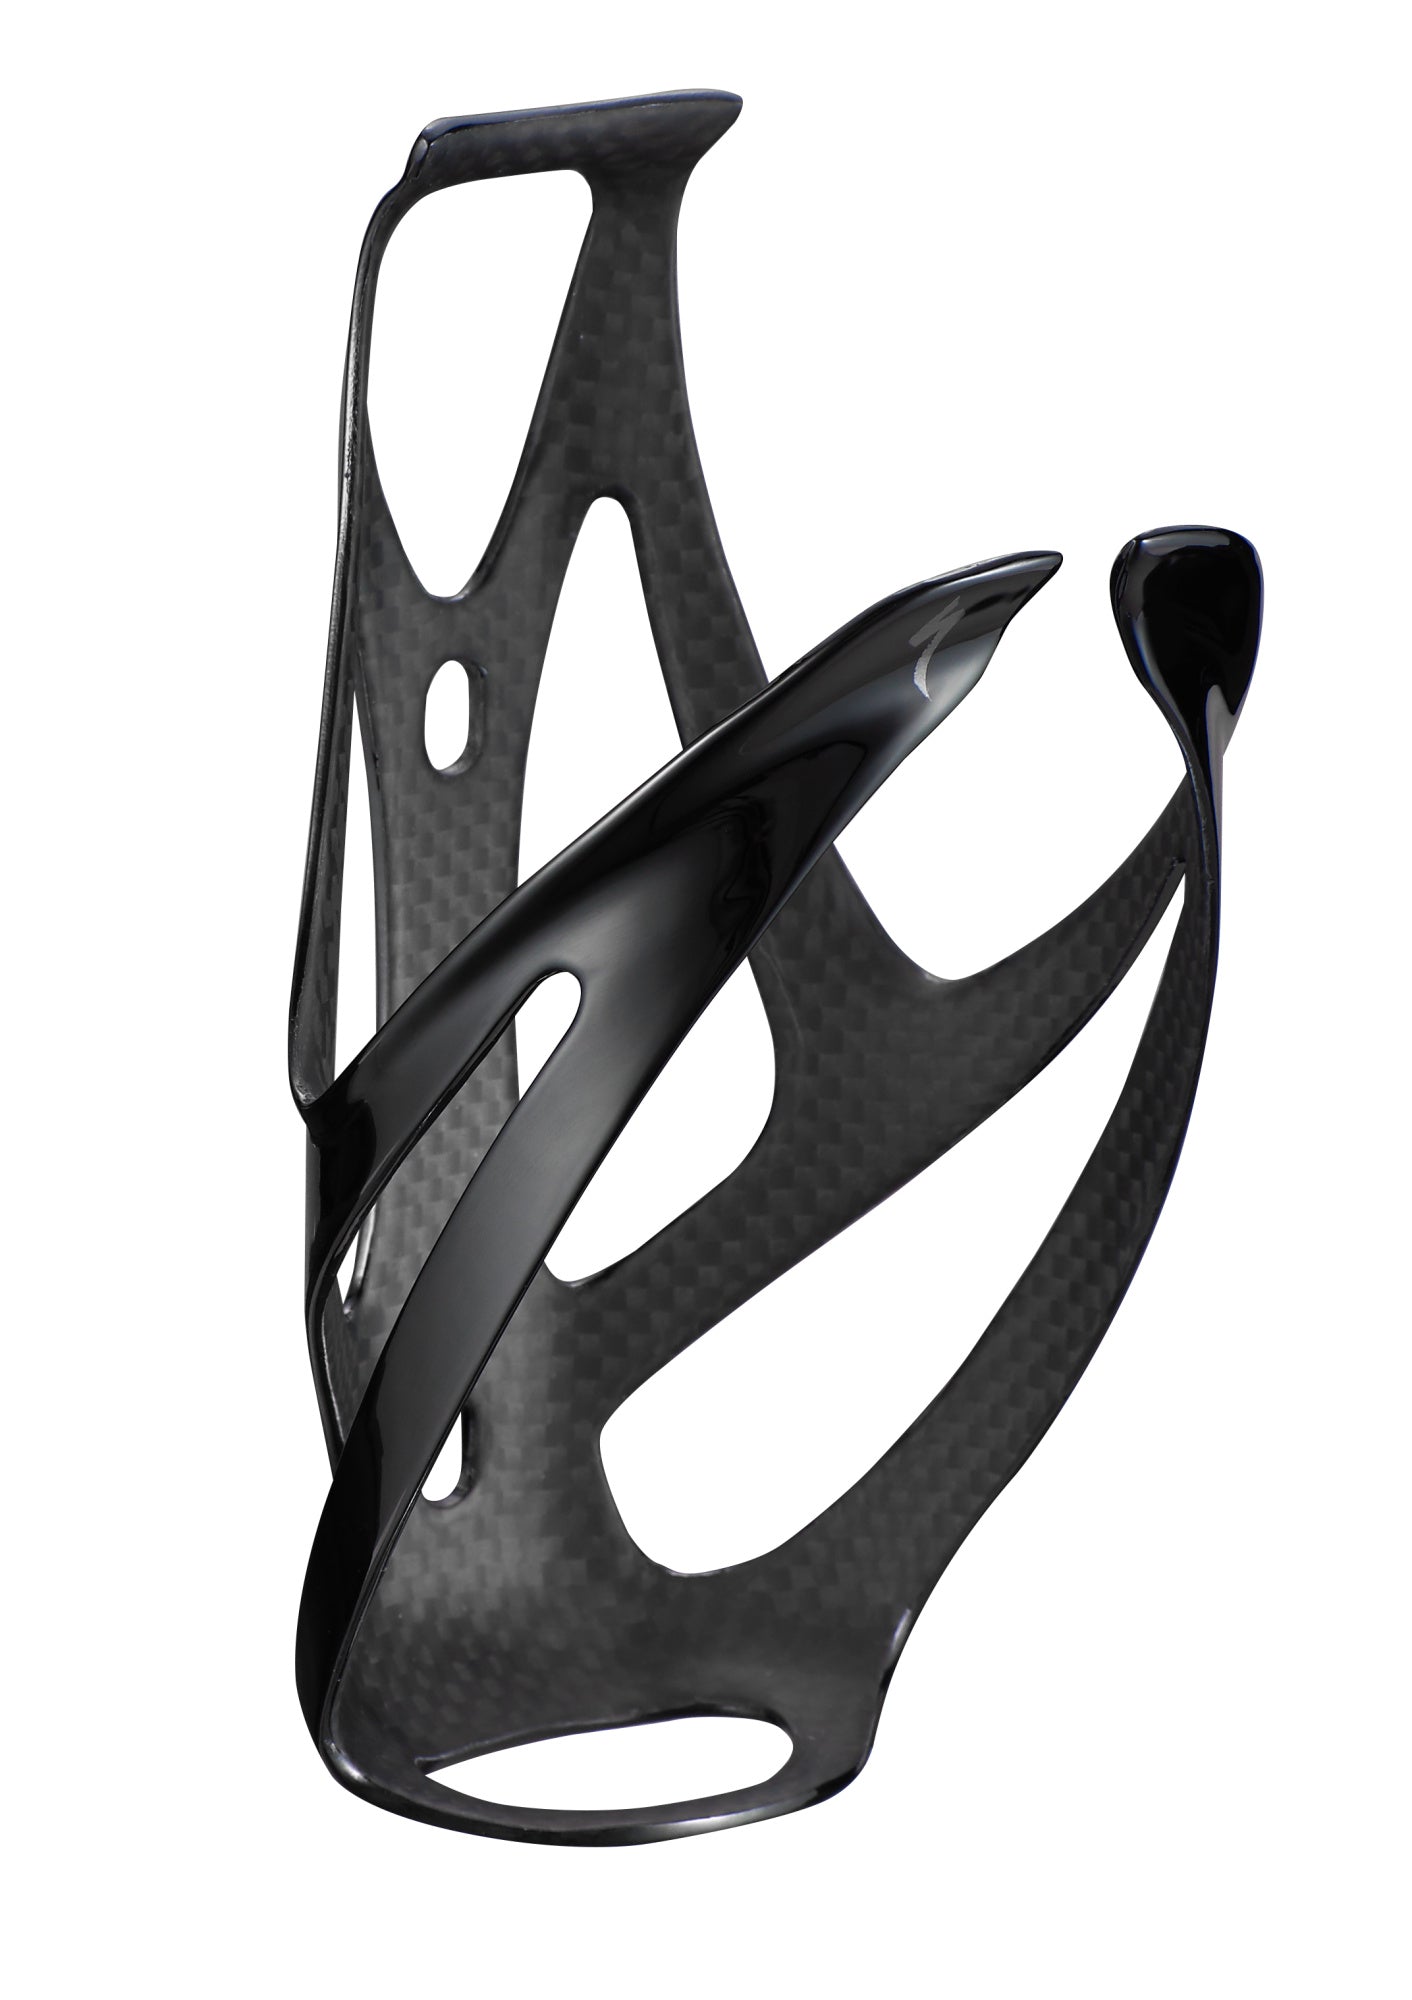 Specialized S-Works Carbon Rib Cage III Juomapulloteline